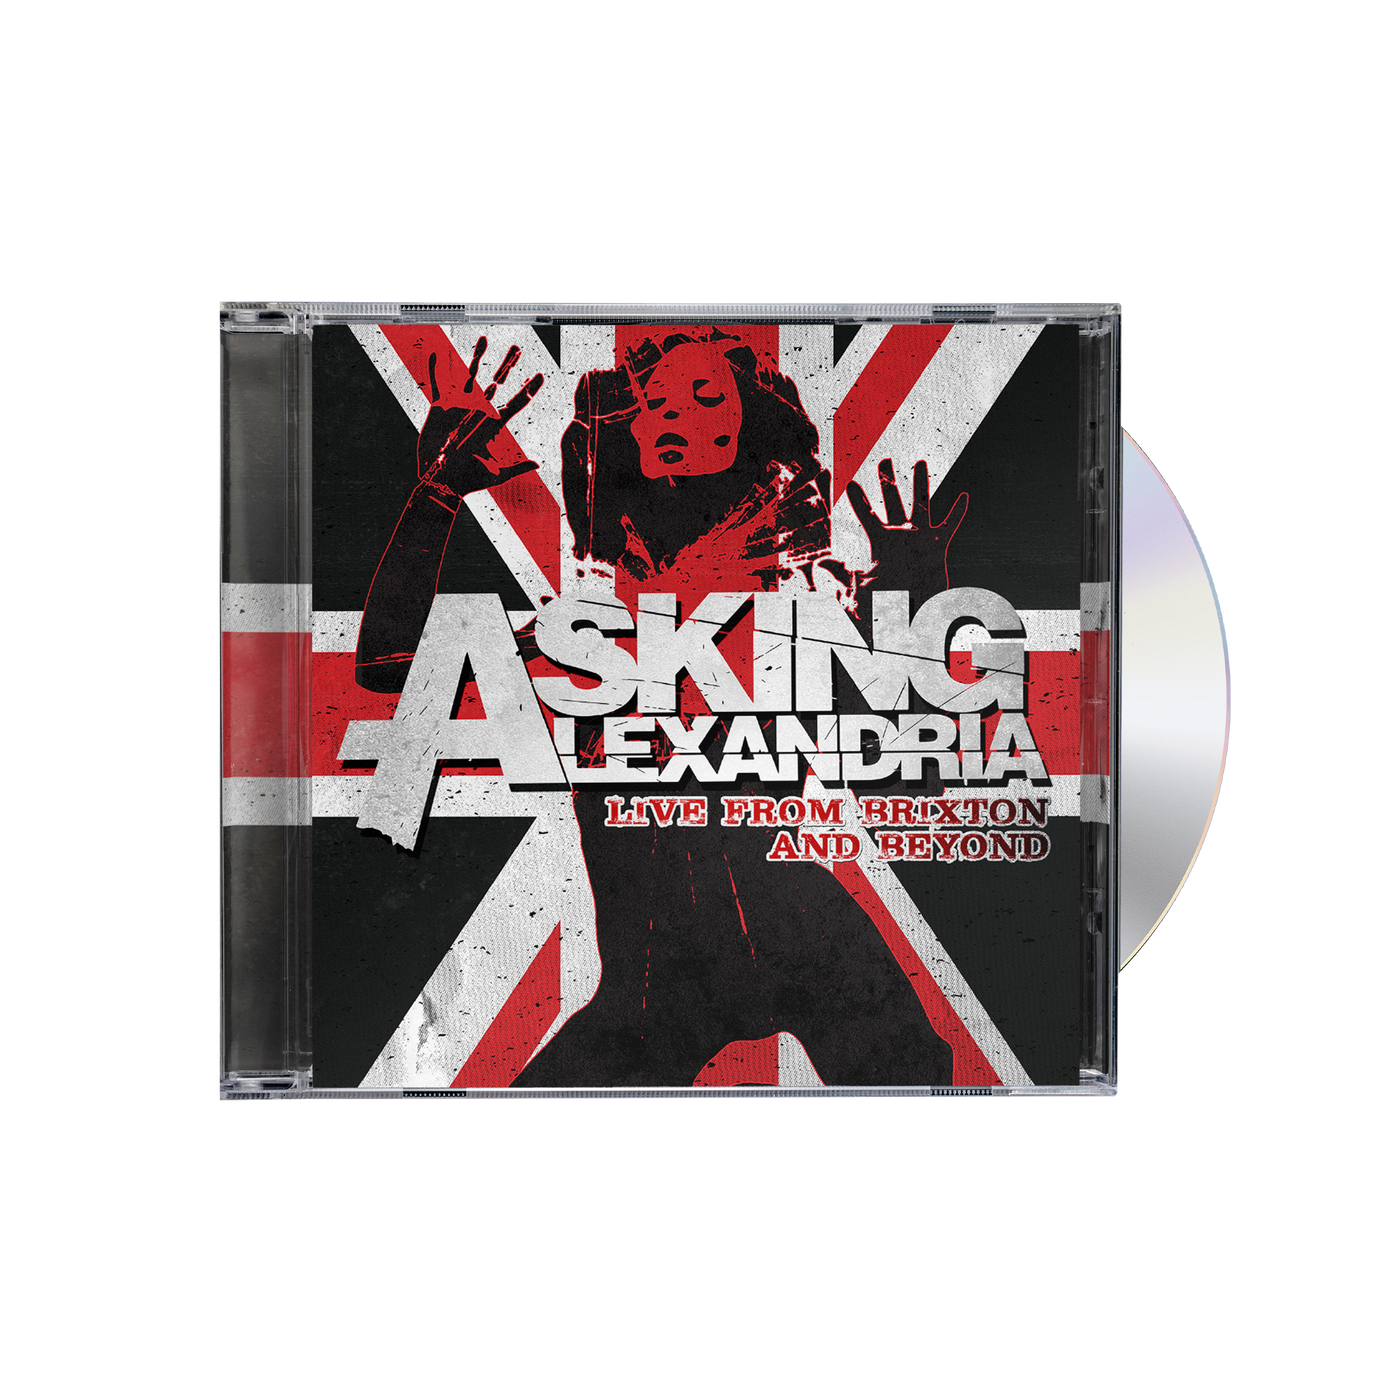 Asking Alexandria - 'Live From Brixton and Beyond' DVD – Sumerian